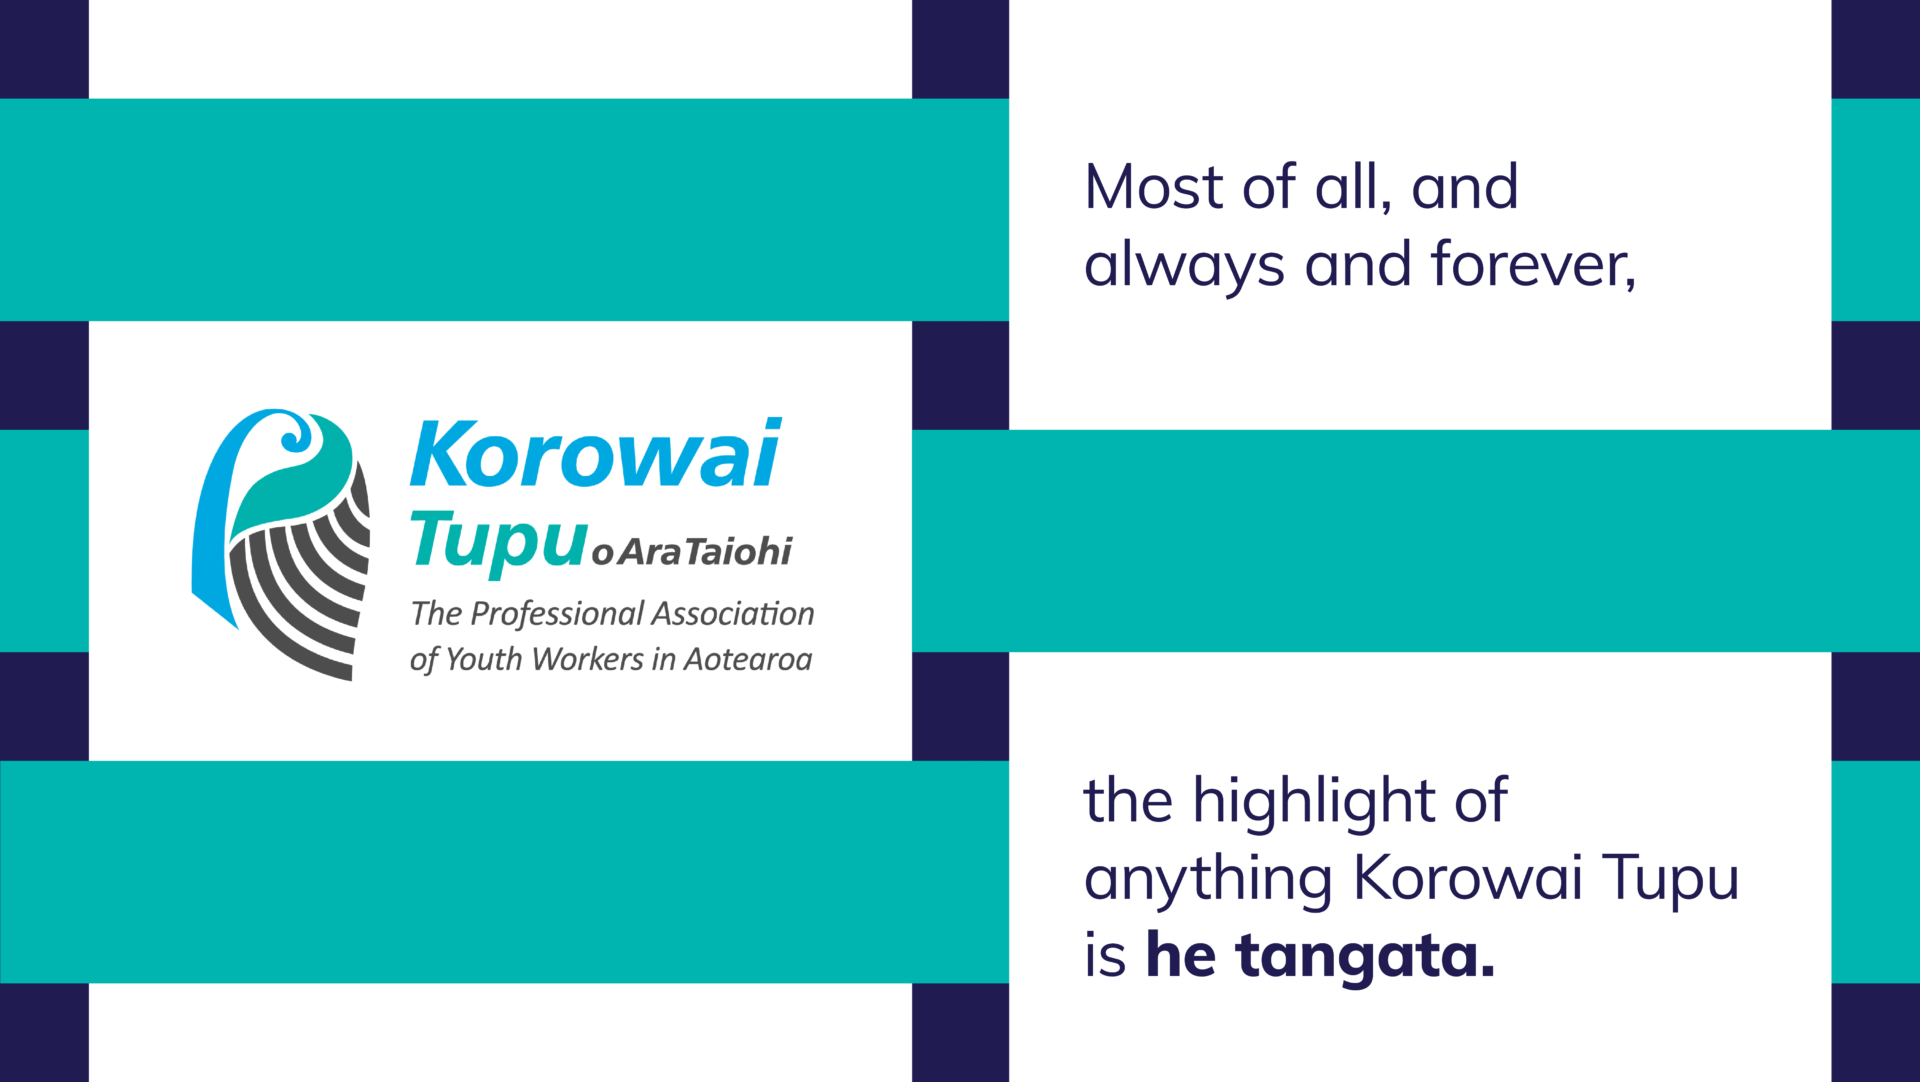 most of all, and always and forever, the highlight of anything Korowai Tupu is he tangata.